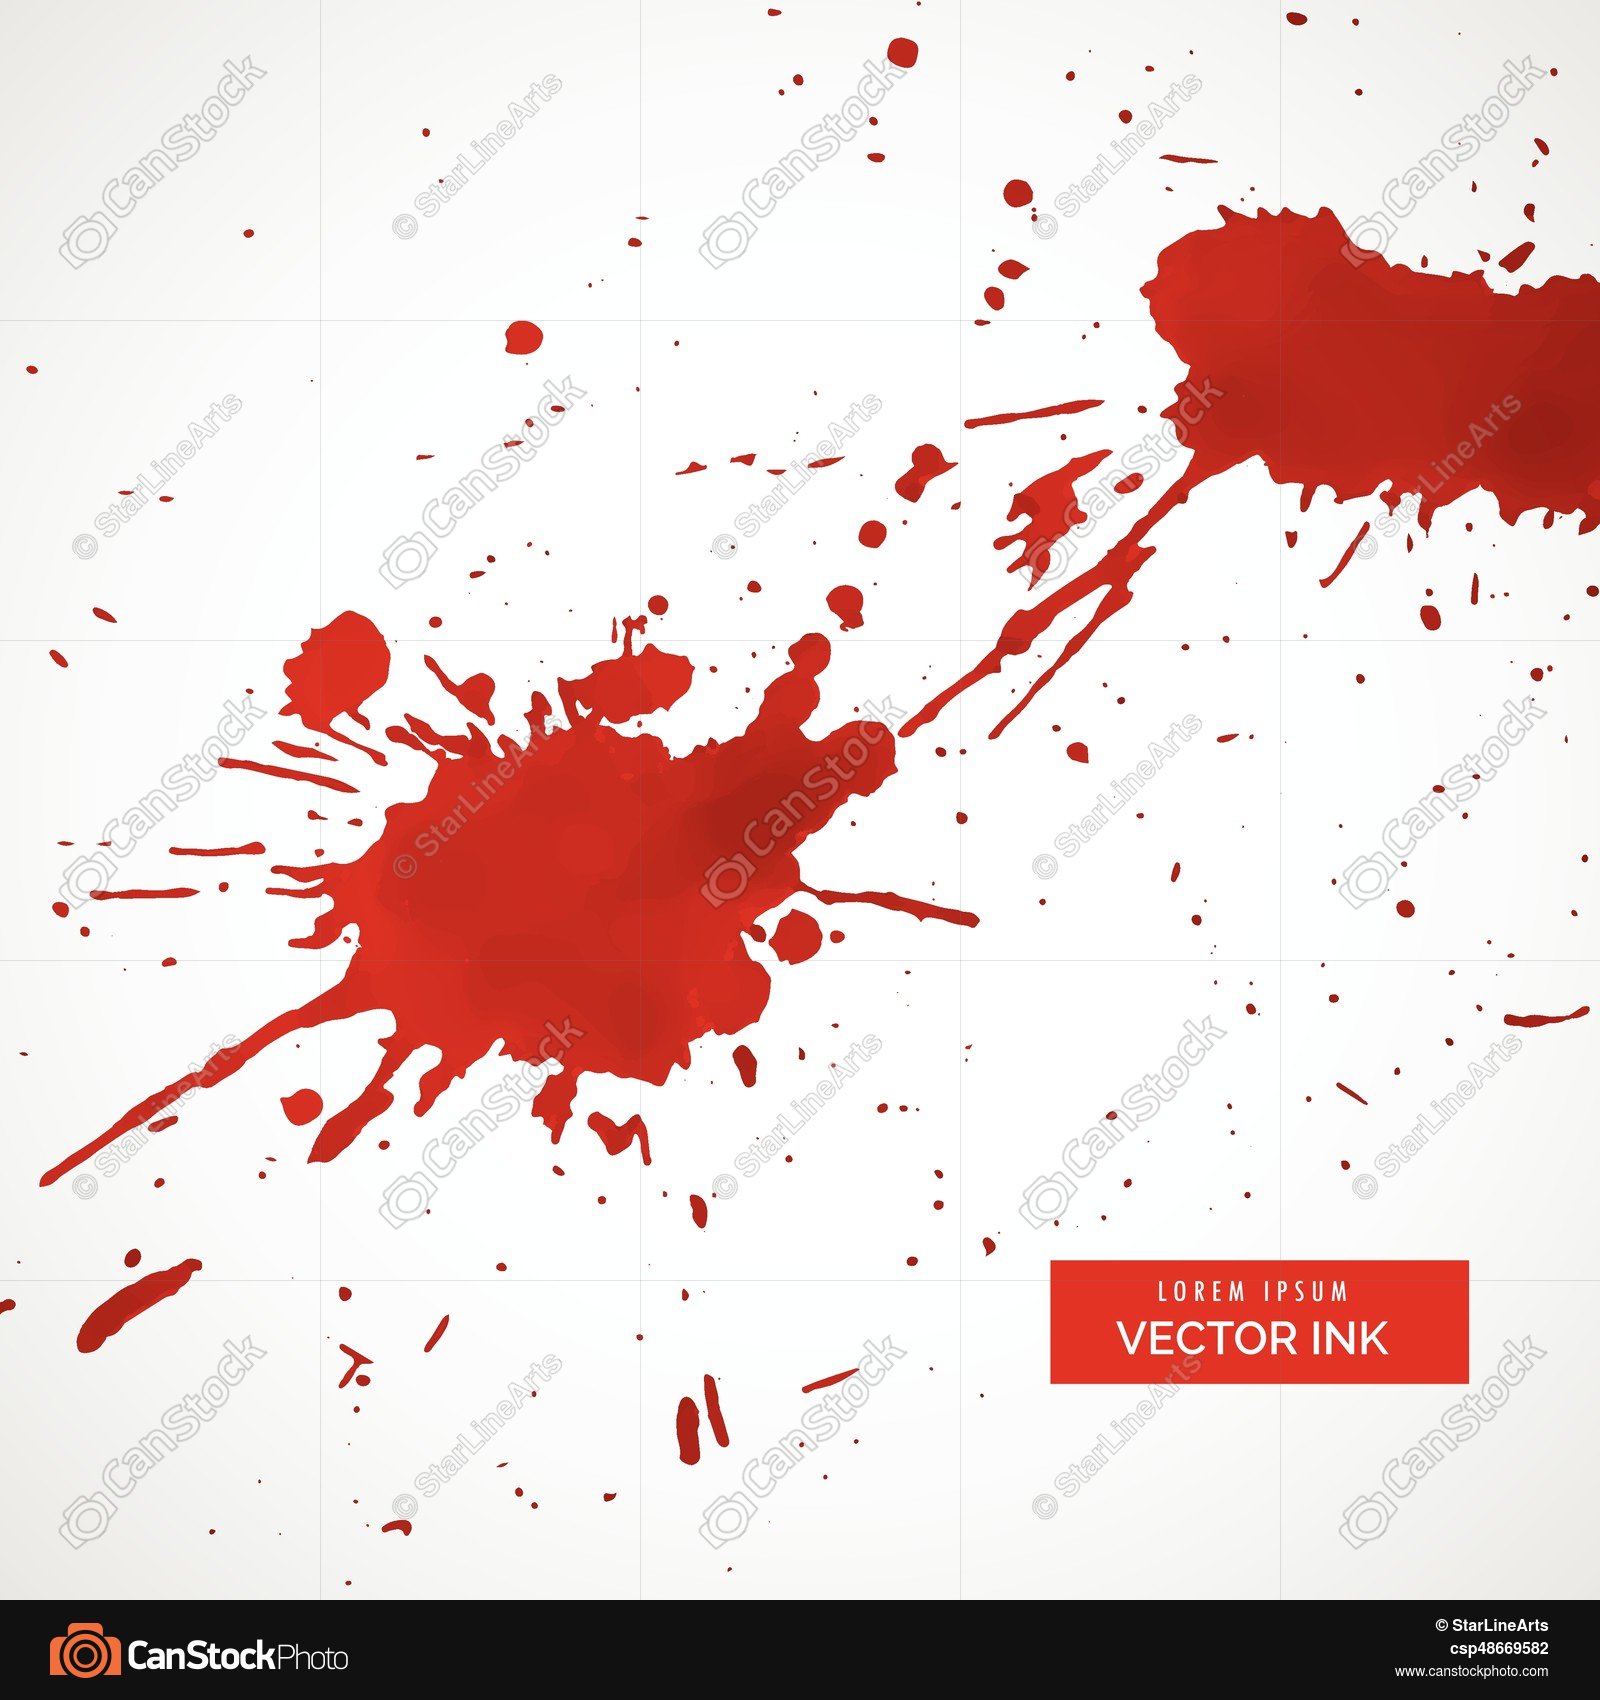 Red ink splatter texture stain background vector - Search Clip Art ...